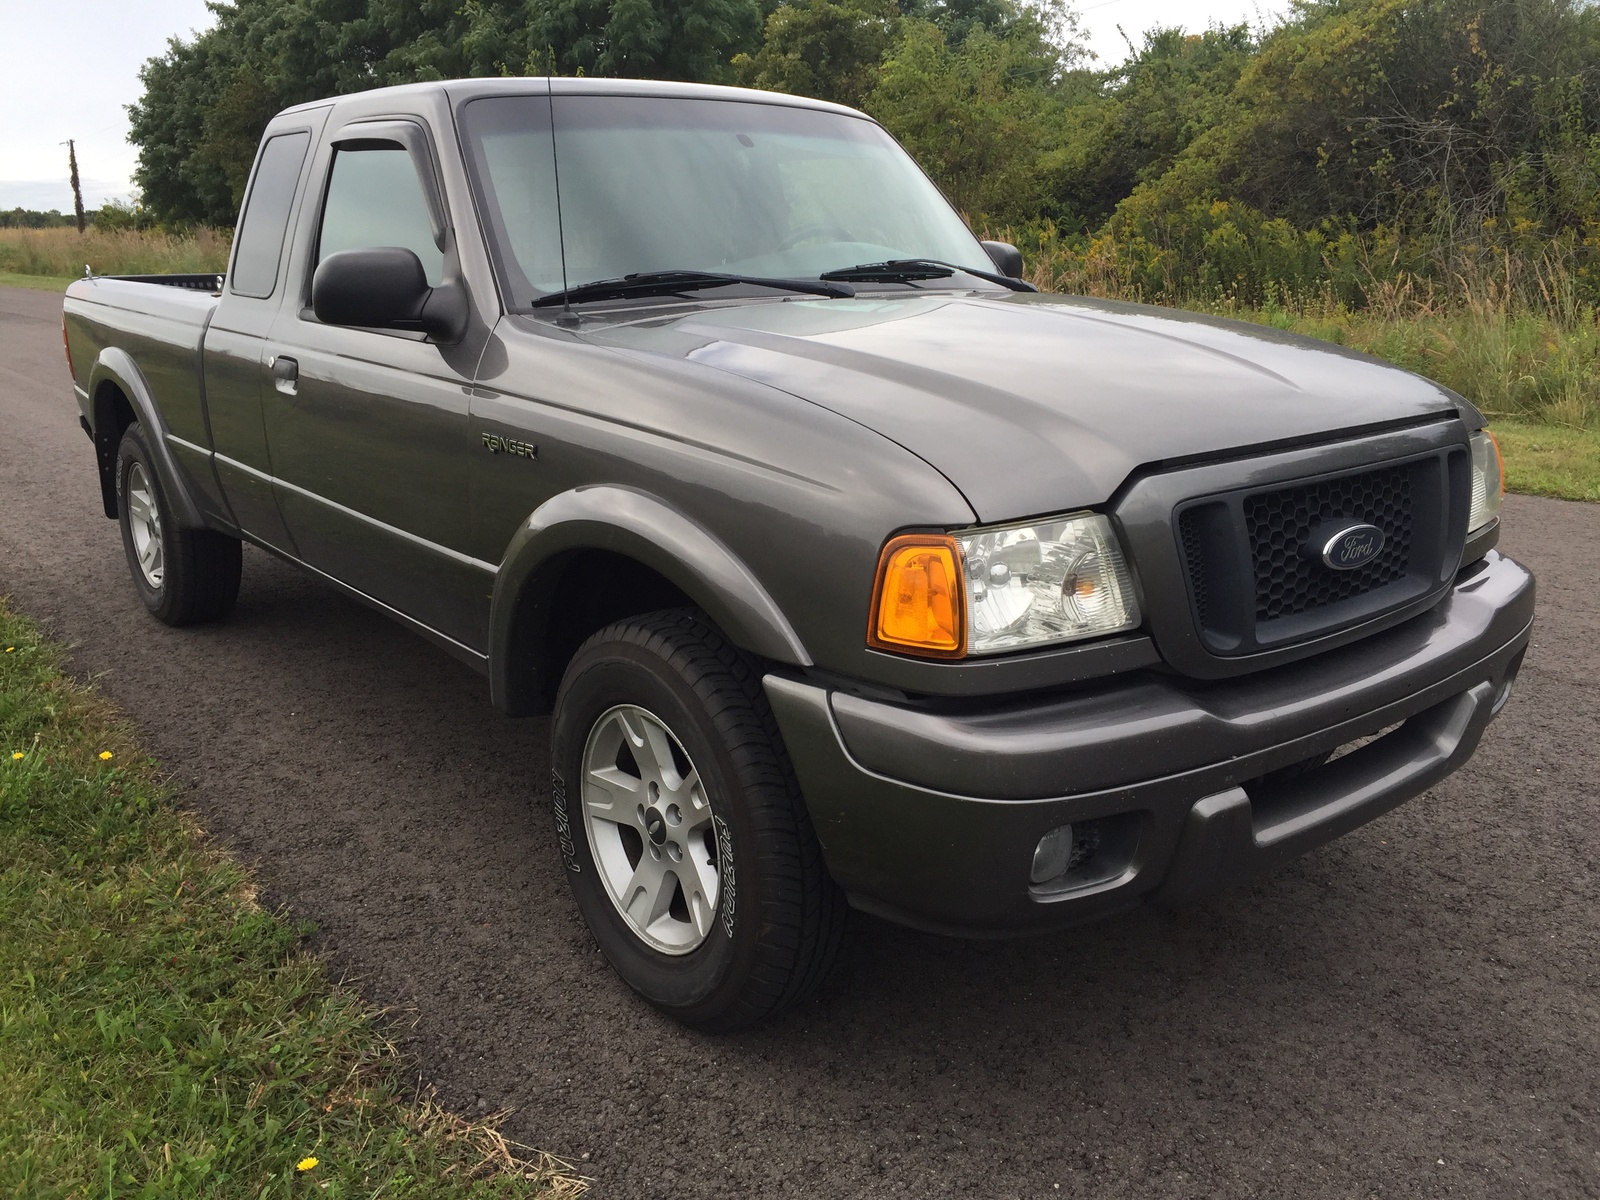 2005 Ford Ranger: Prices, Reviews & Pictures - CarGurus